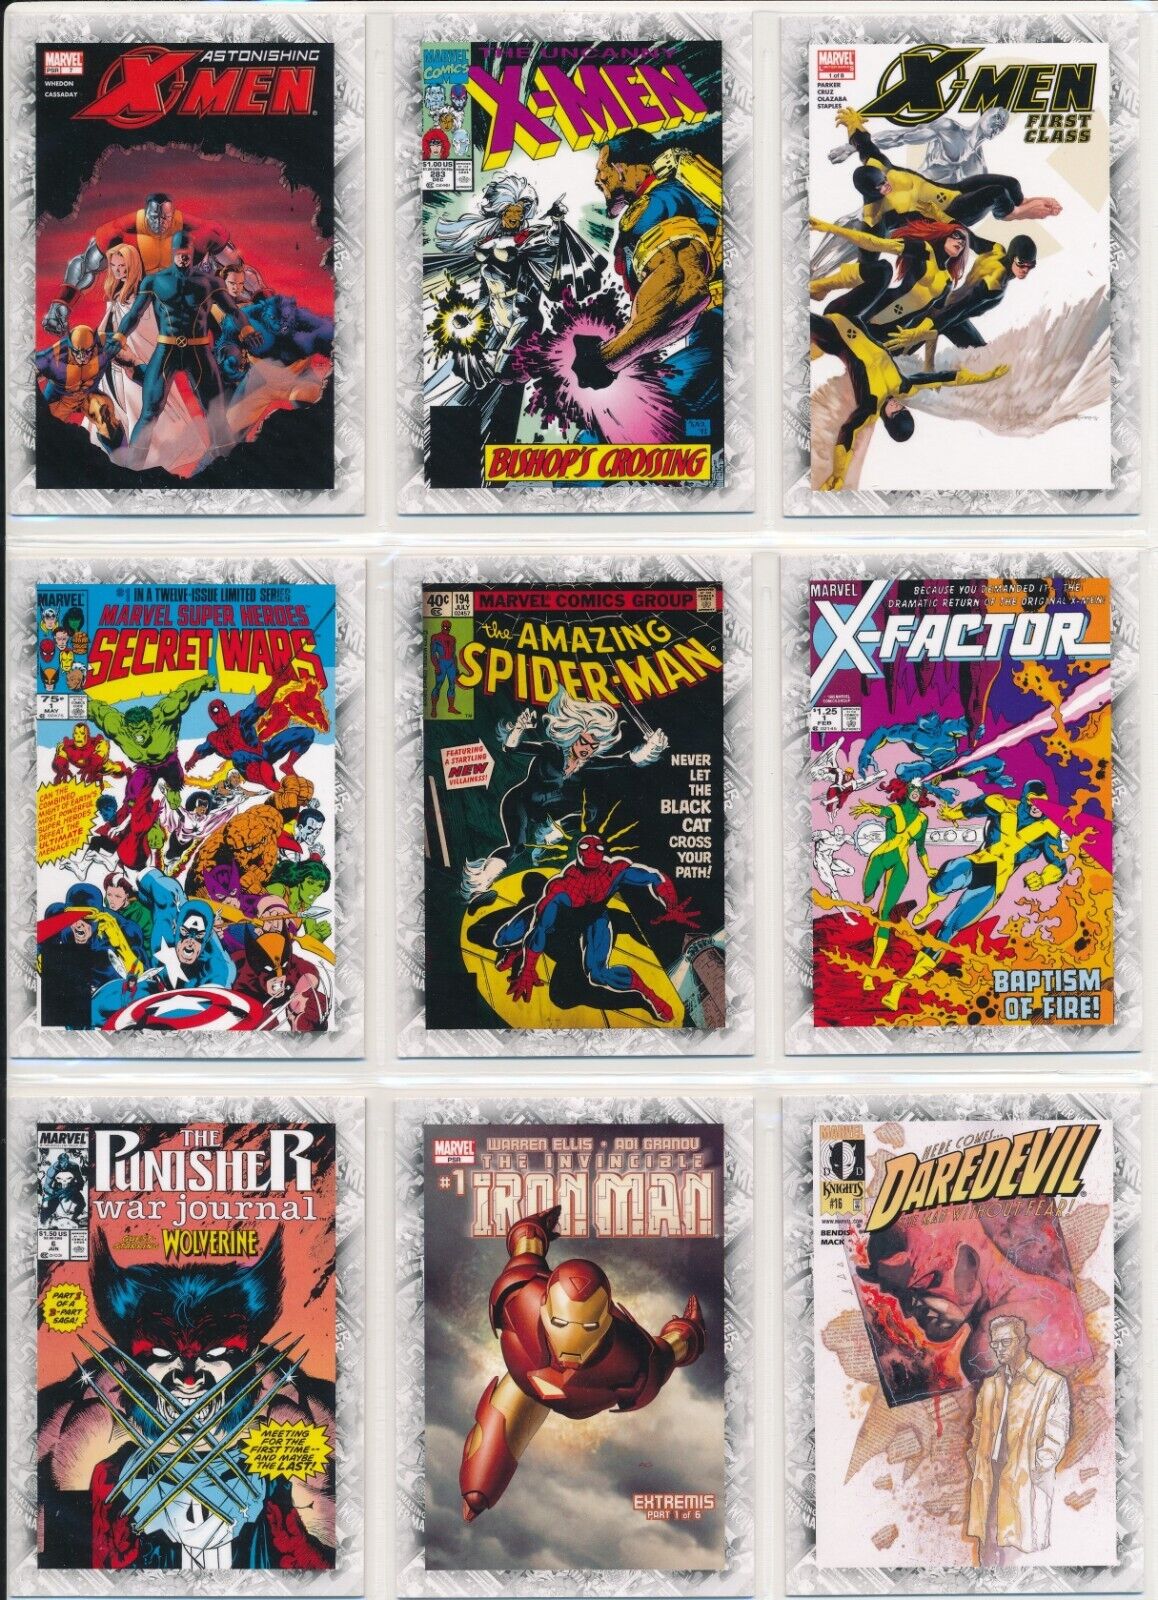 2012 Marvel Beginnings Breakthrough Issues Mixed Chase Card Lot of (9) Cards #3